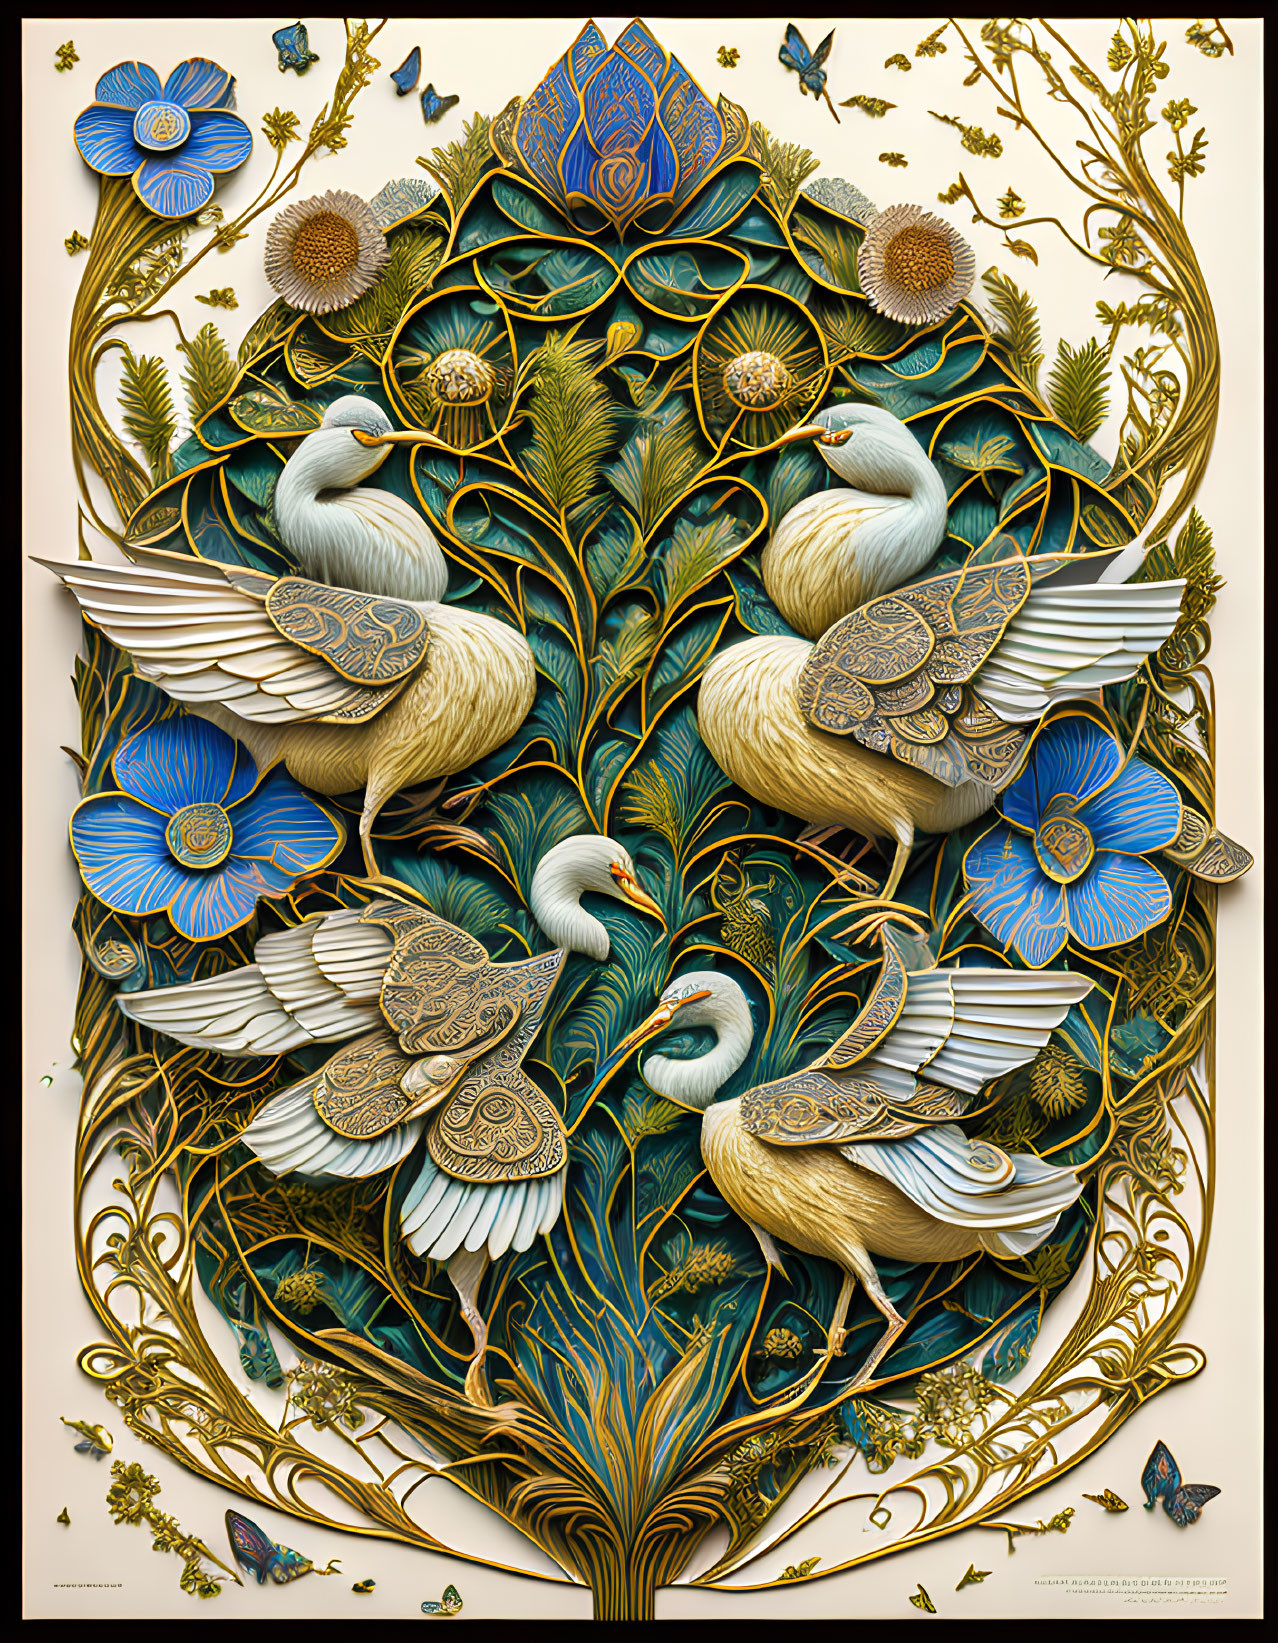 Detailed illustration of four doves in a golden leaf and peacock feather tapestry with blue flowers and